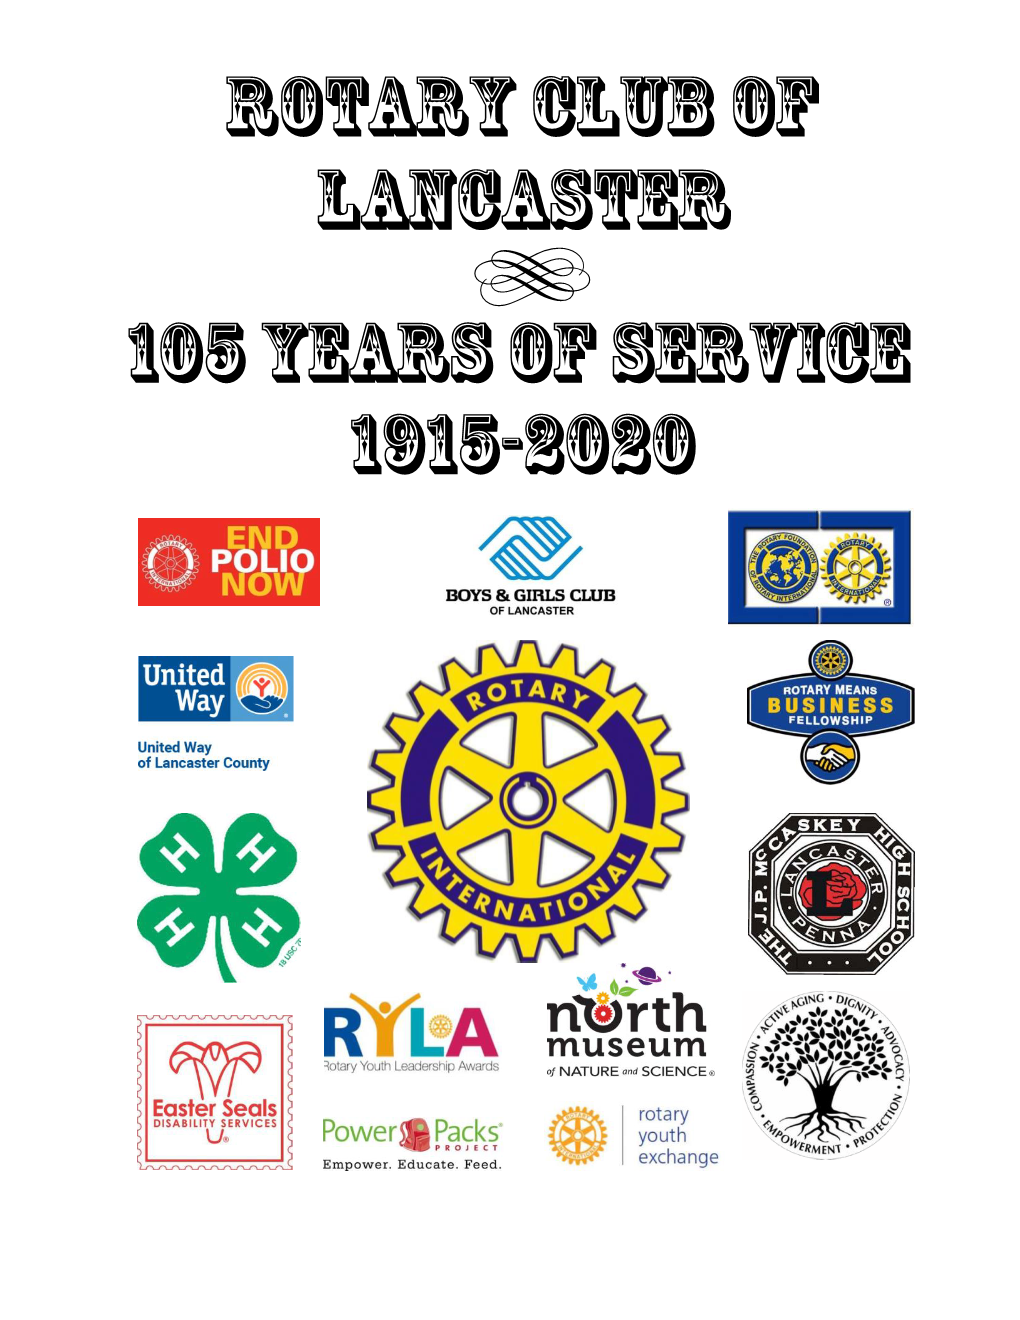 Rotary Club of Lancaster 105 Years of Service 1915-2020 5